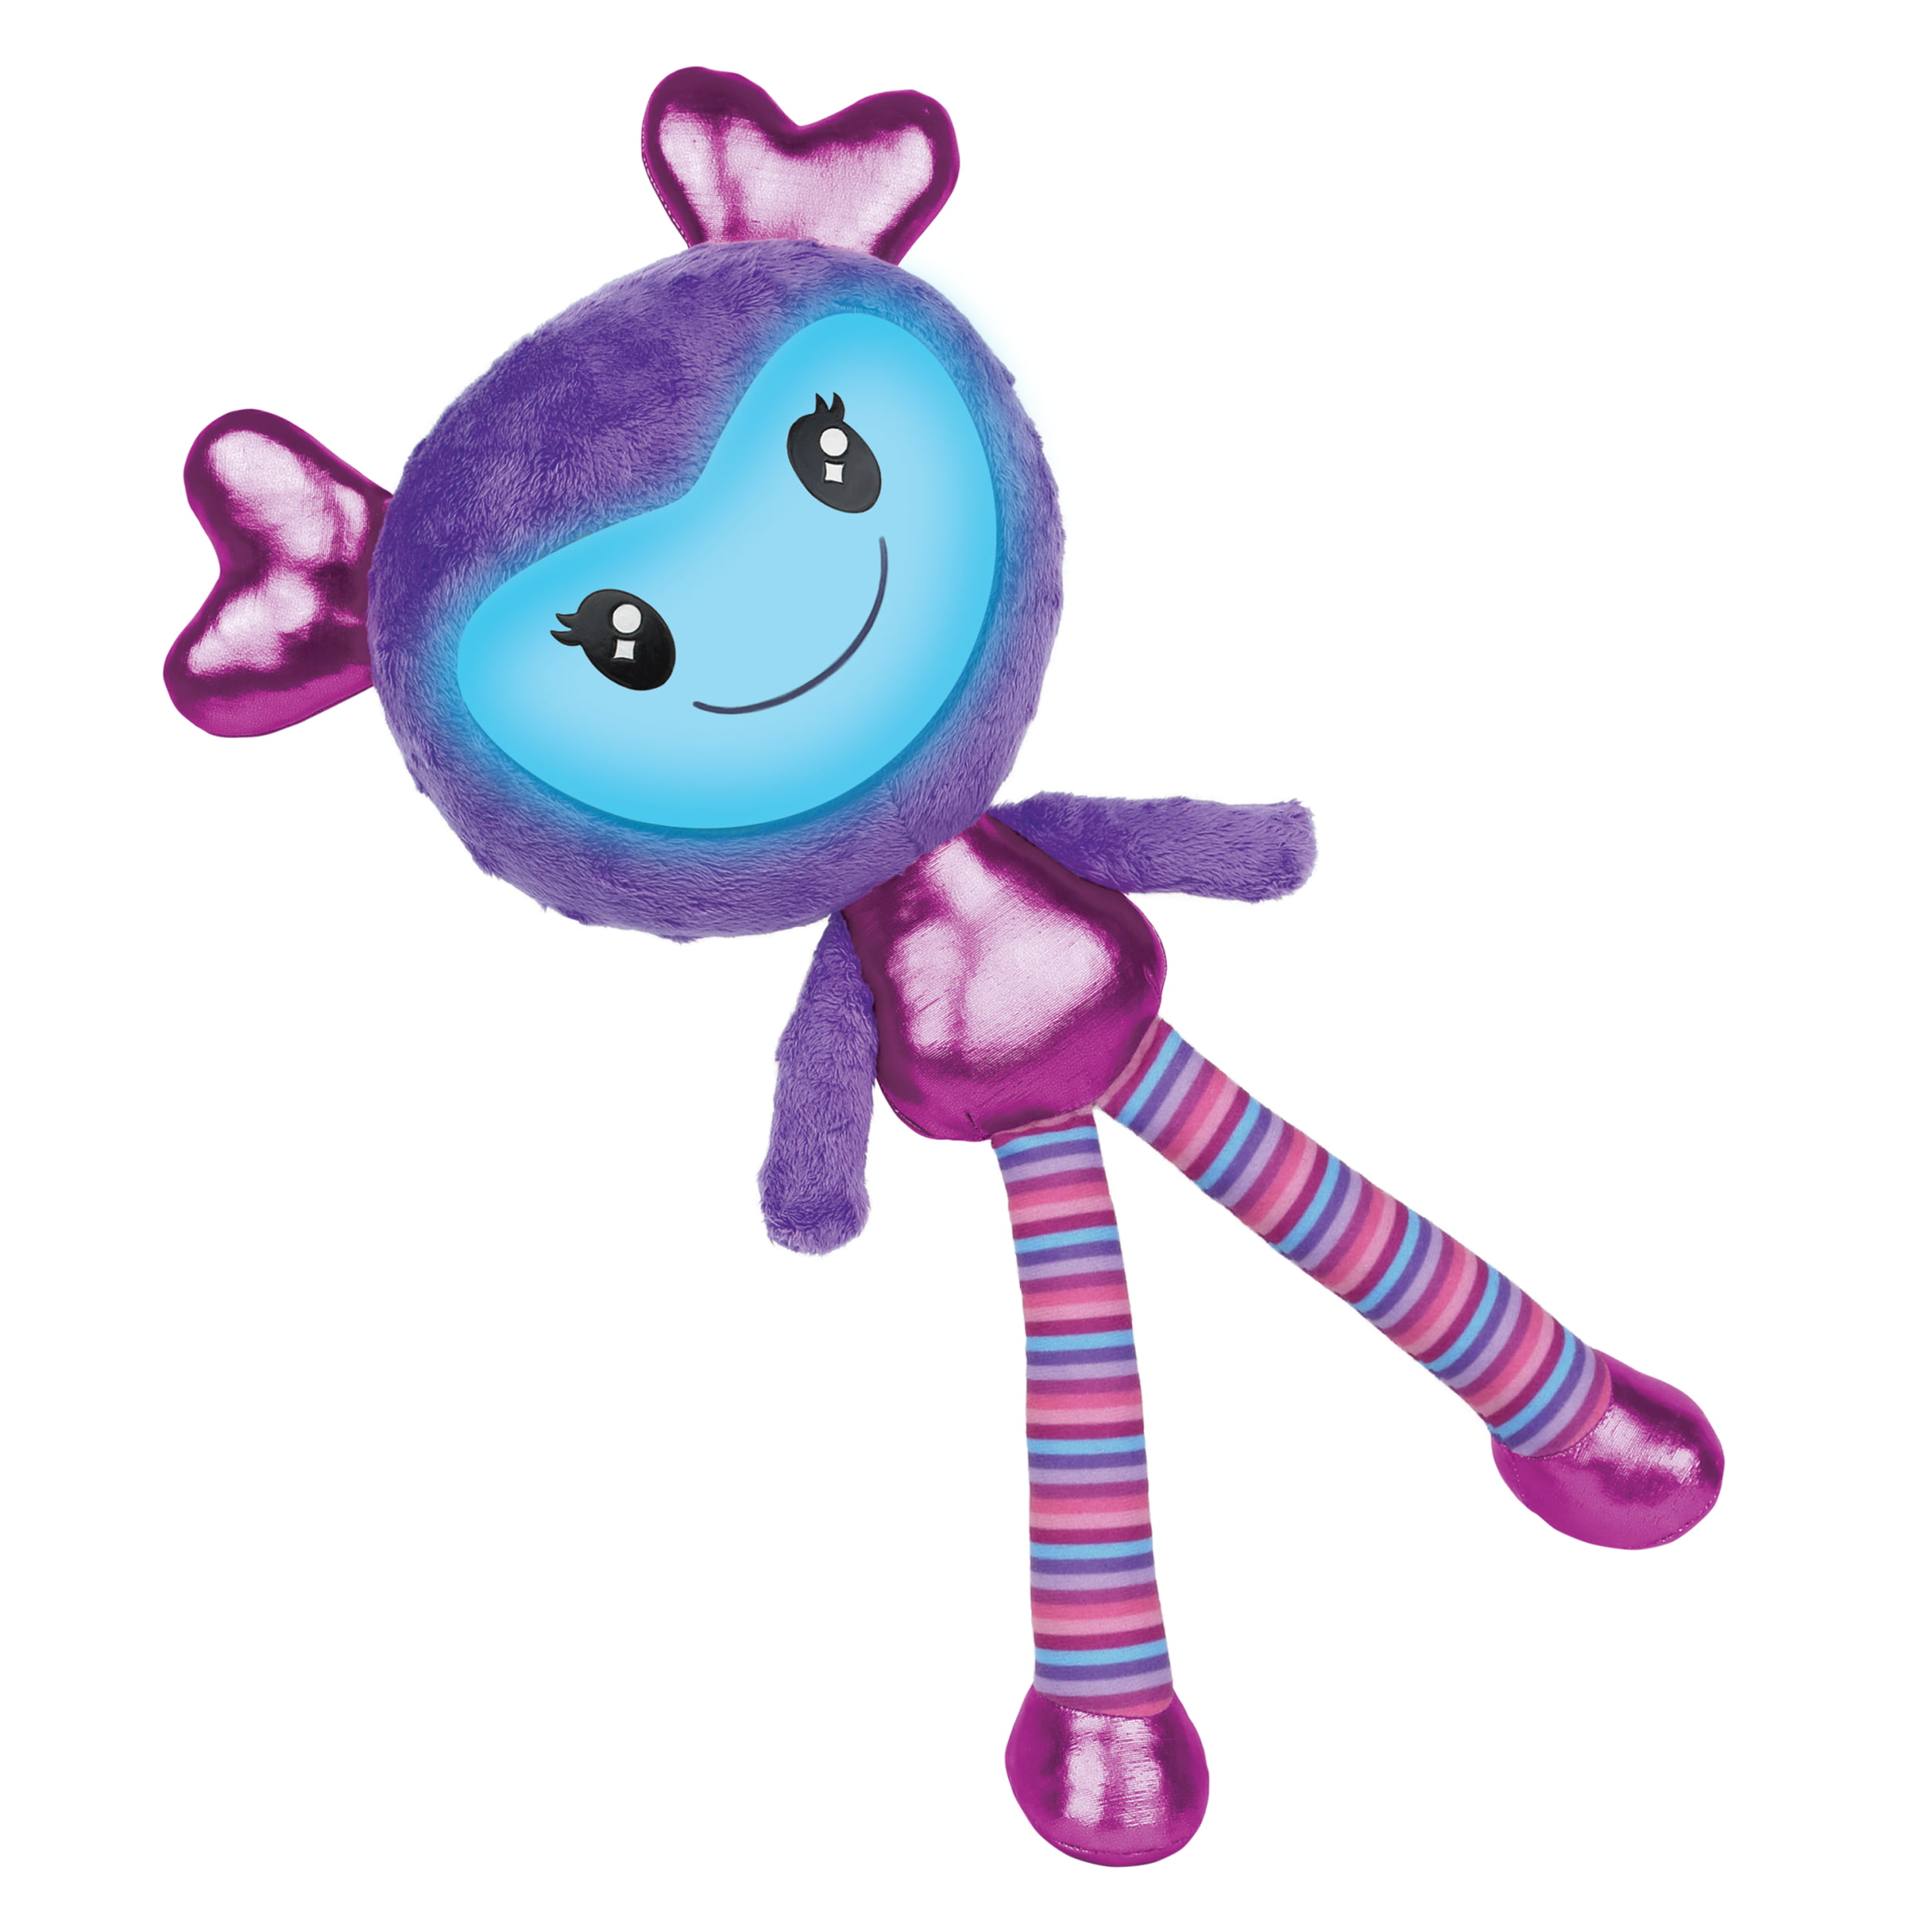 Brightlings Interactive Singing & Talking 15 Inch Plush Doll Spin Master Pink for sale online 